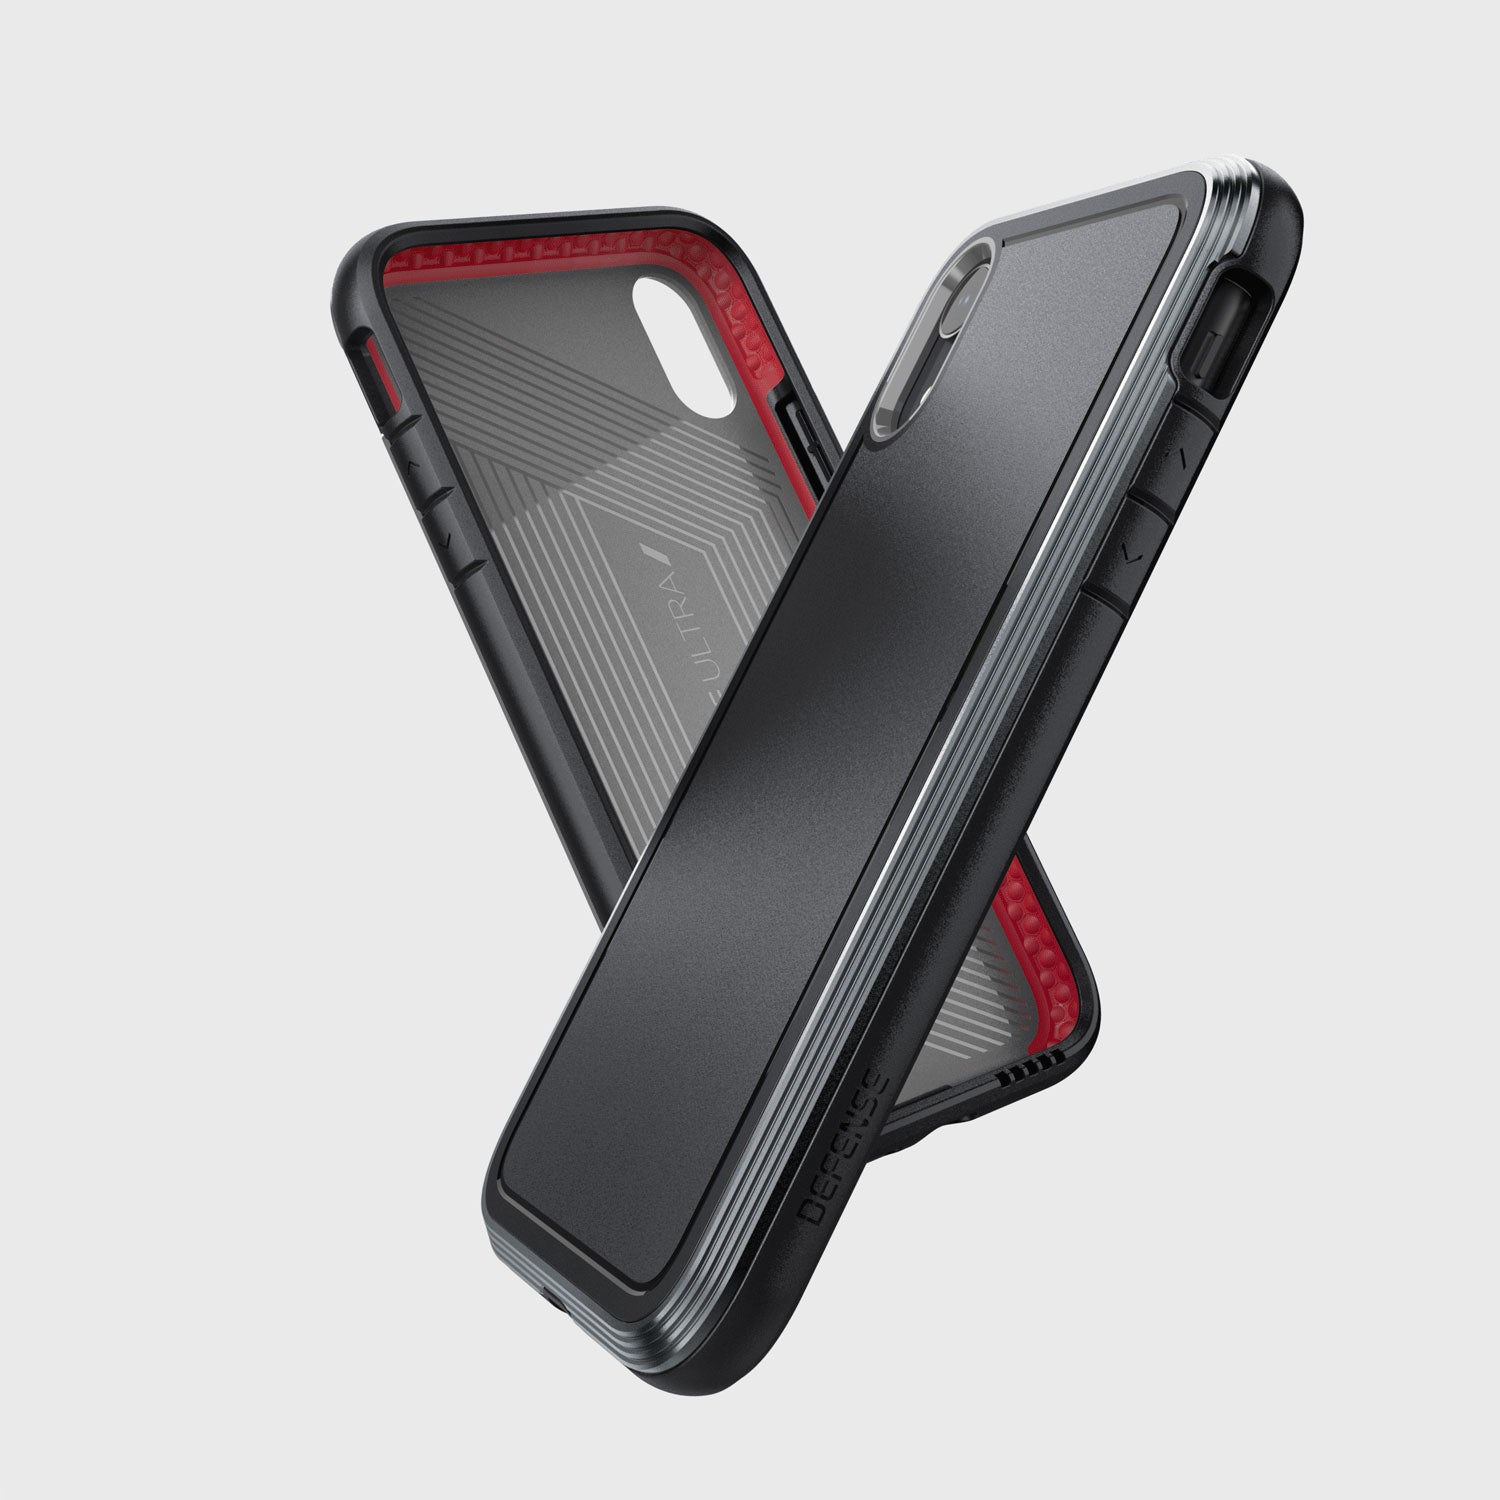 A Raptic ULTRA case in black and red, providing device protection for the iPhone XR, placed on a white background.